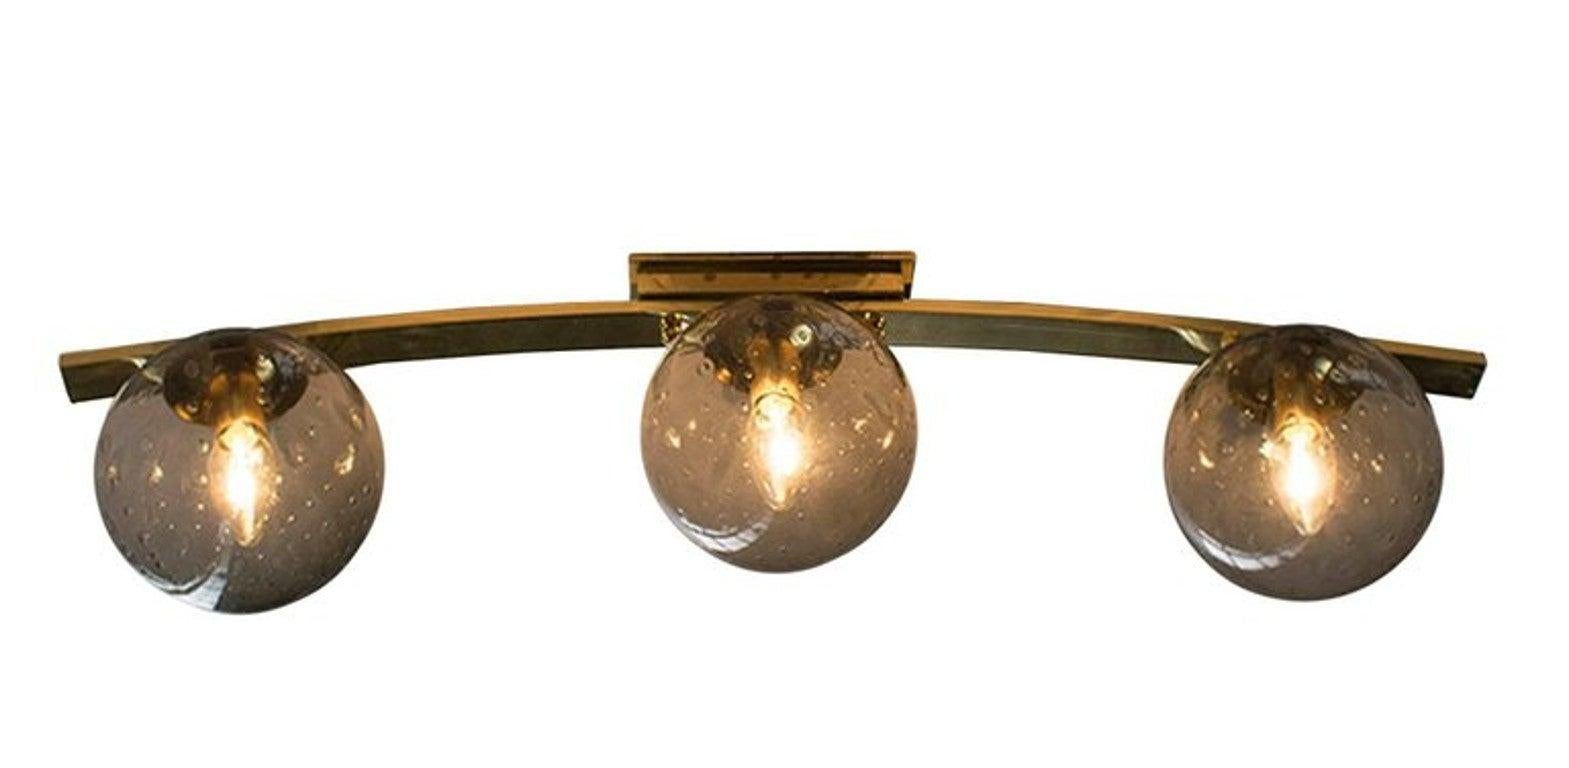 Italian modern wall light or flushmount with smoky Murano glass globes carefully hand blown with bubbles inside the glass using Bollicine technique, mounted on curved polished finish brass metal frame / Designed by Fabio Bergomi / Made in Italy
3